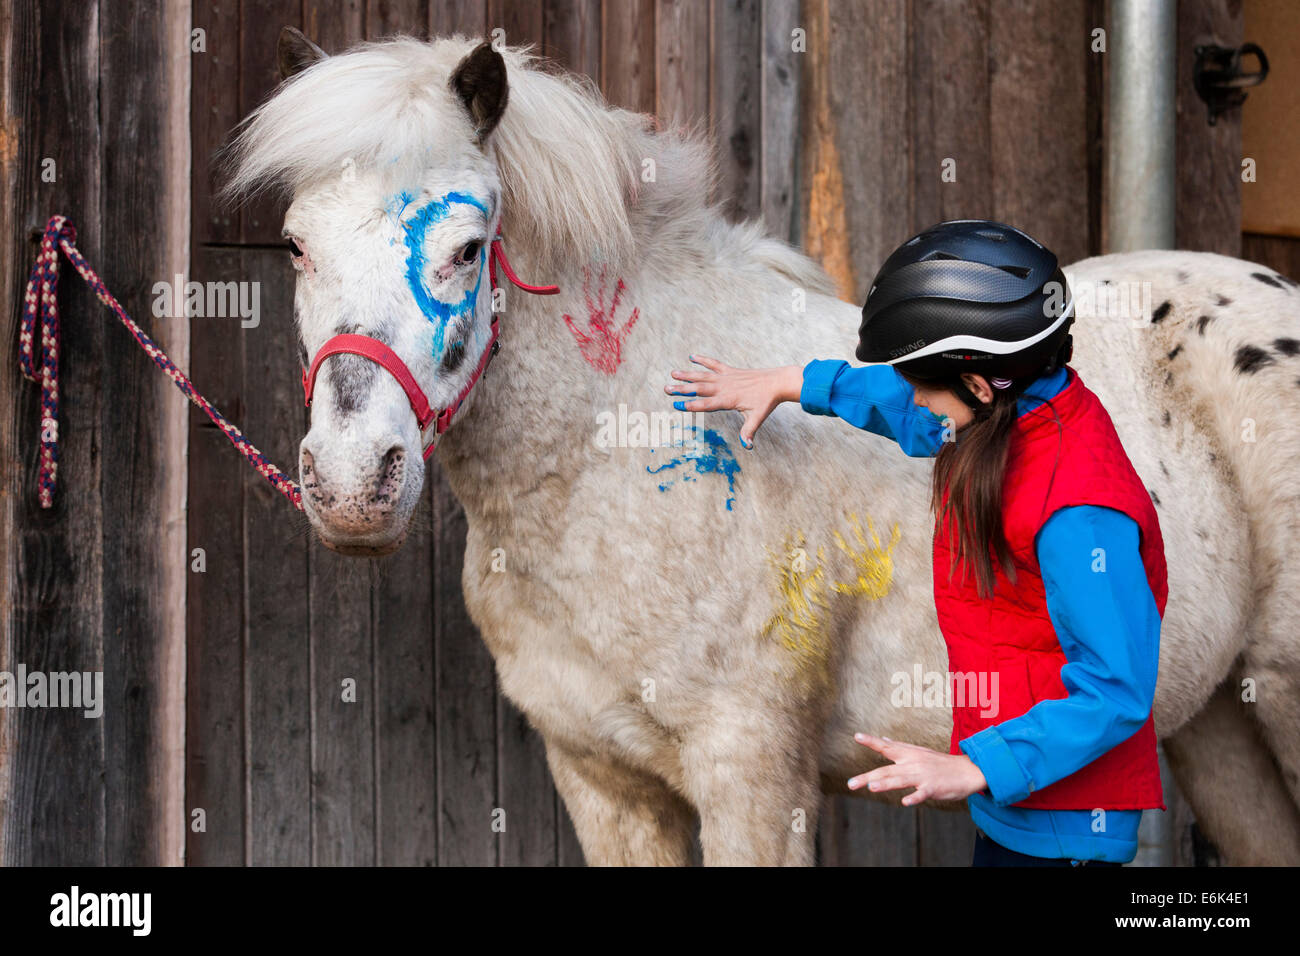 Girl wearing a riding helmet painting a pony with finger paints, gray, Tyrol, Austria Stock Photo